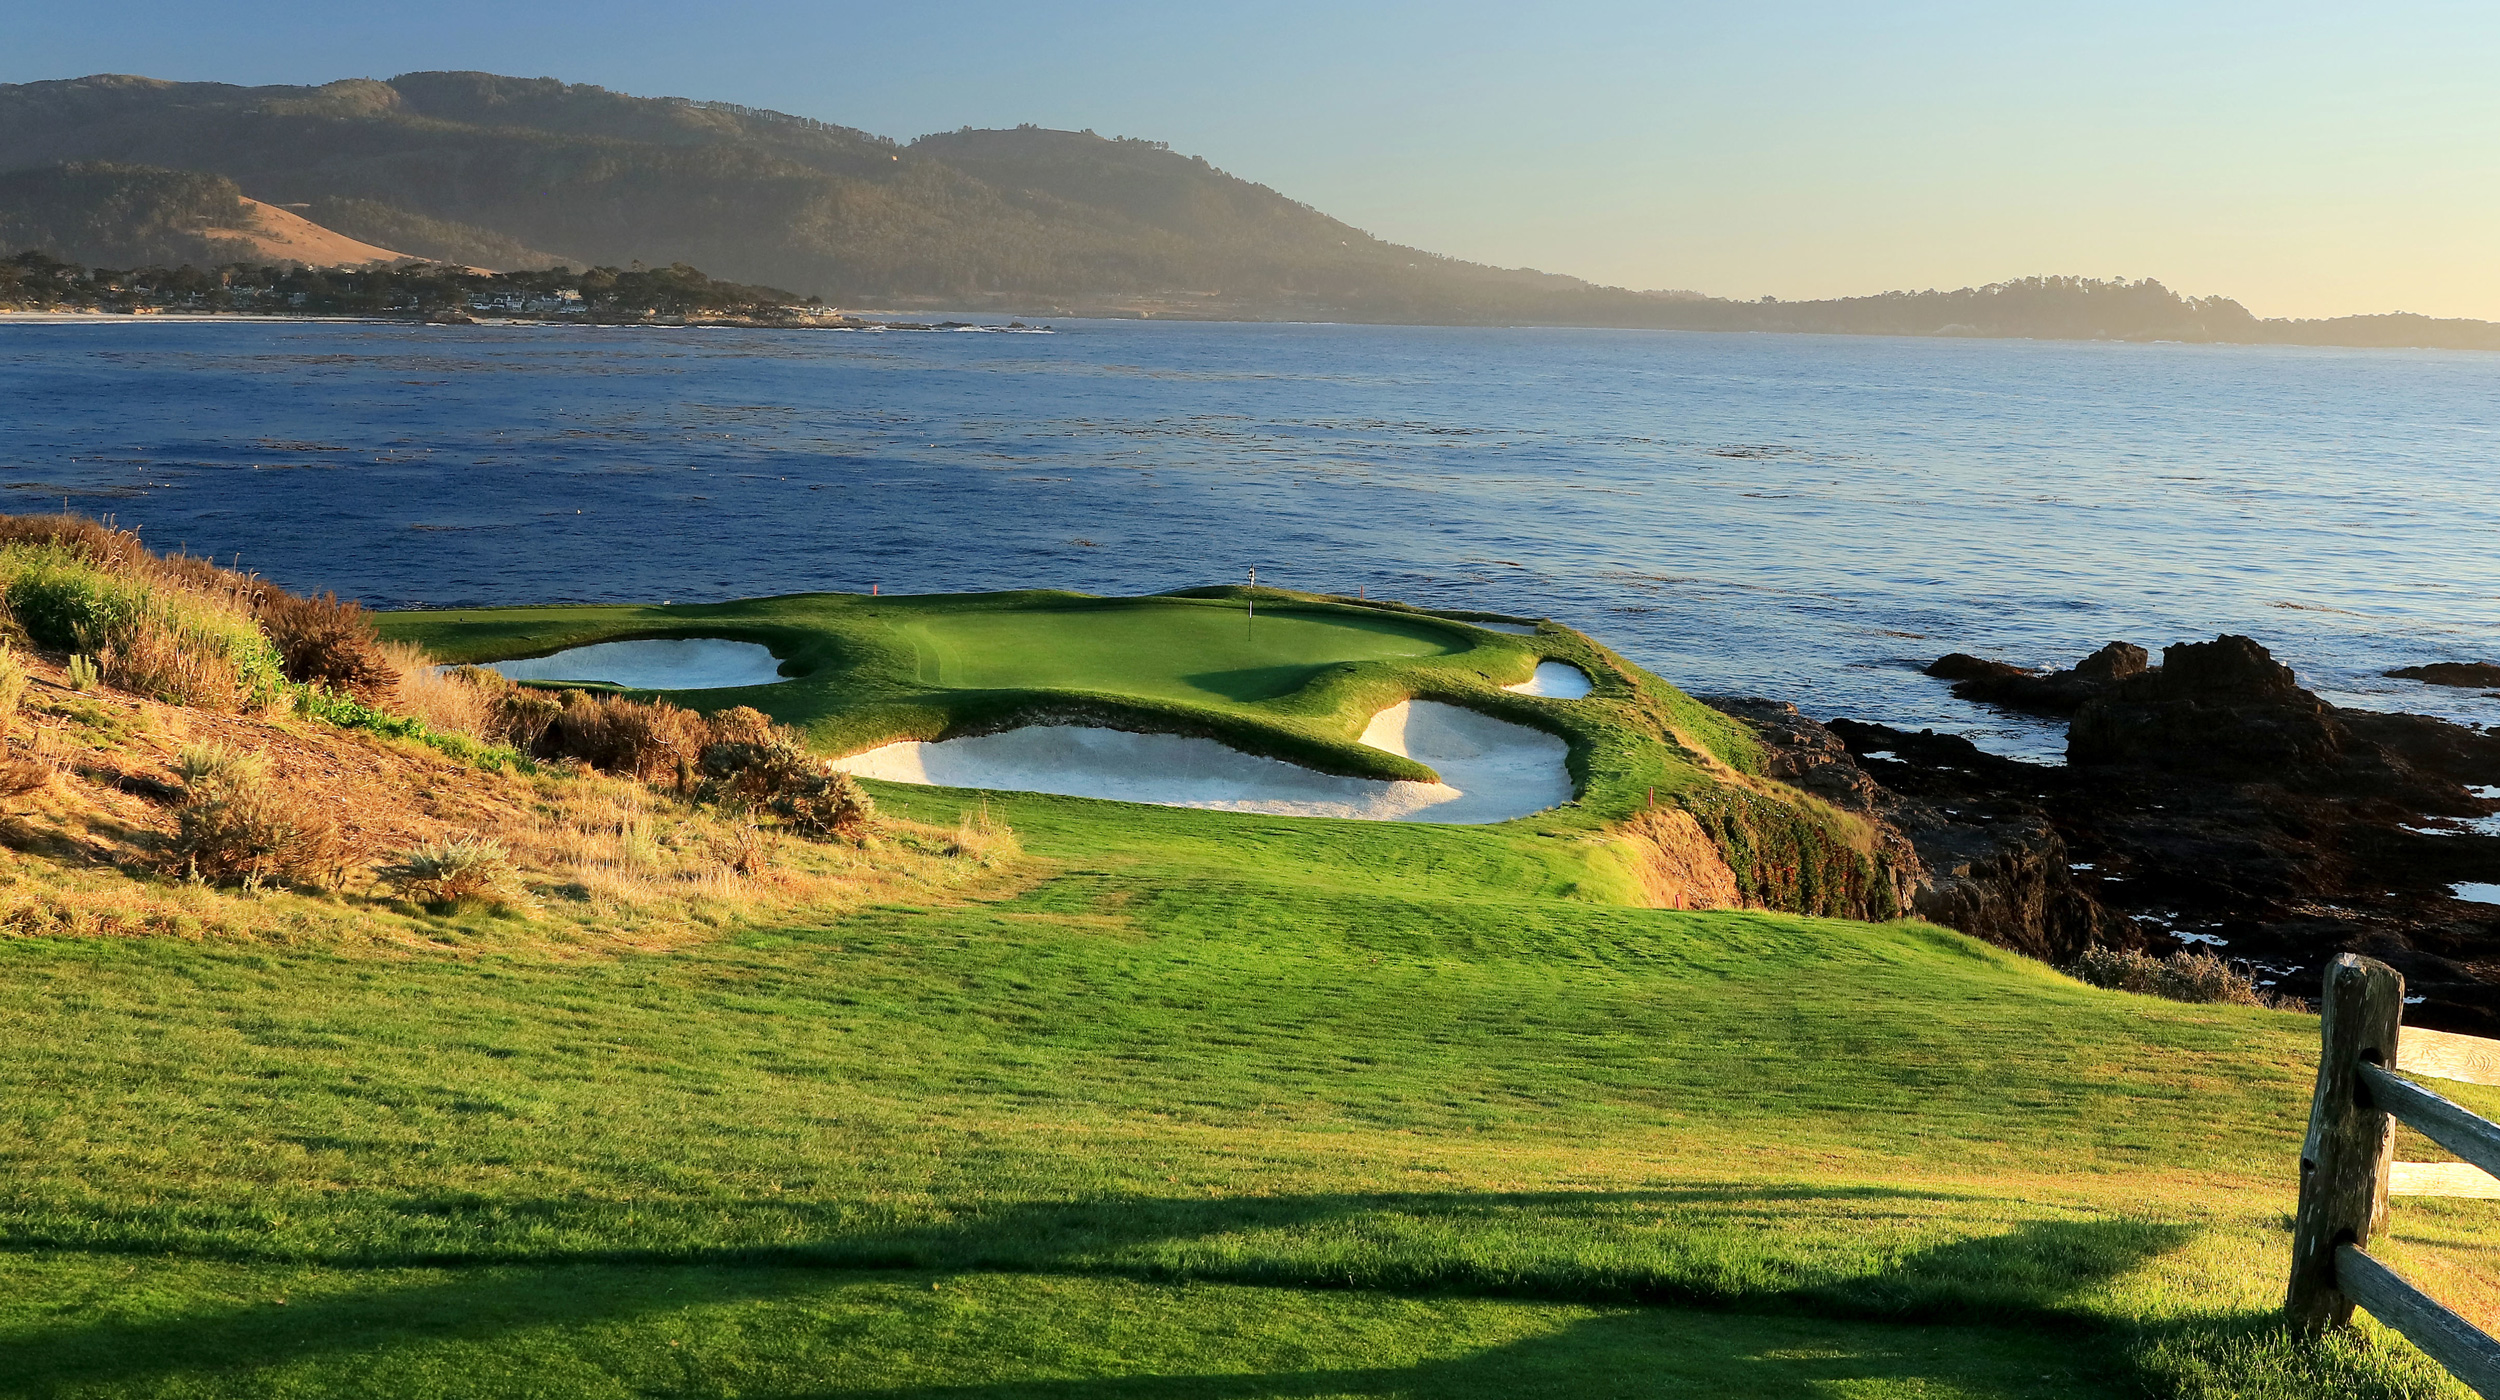 AT&T Pebble Beach Pro-Am 2023 Live Stream | Golf Monthly